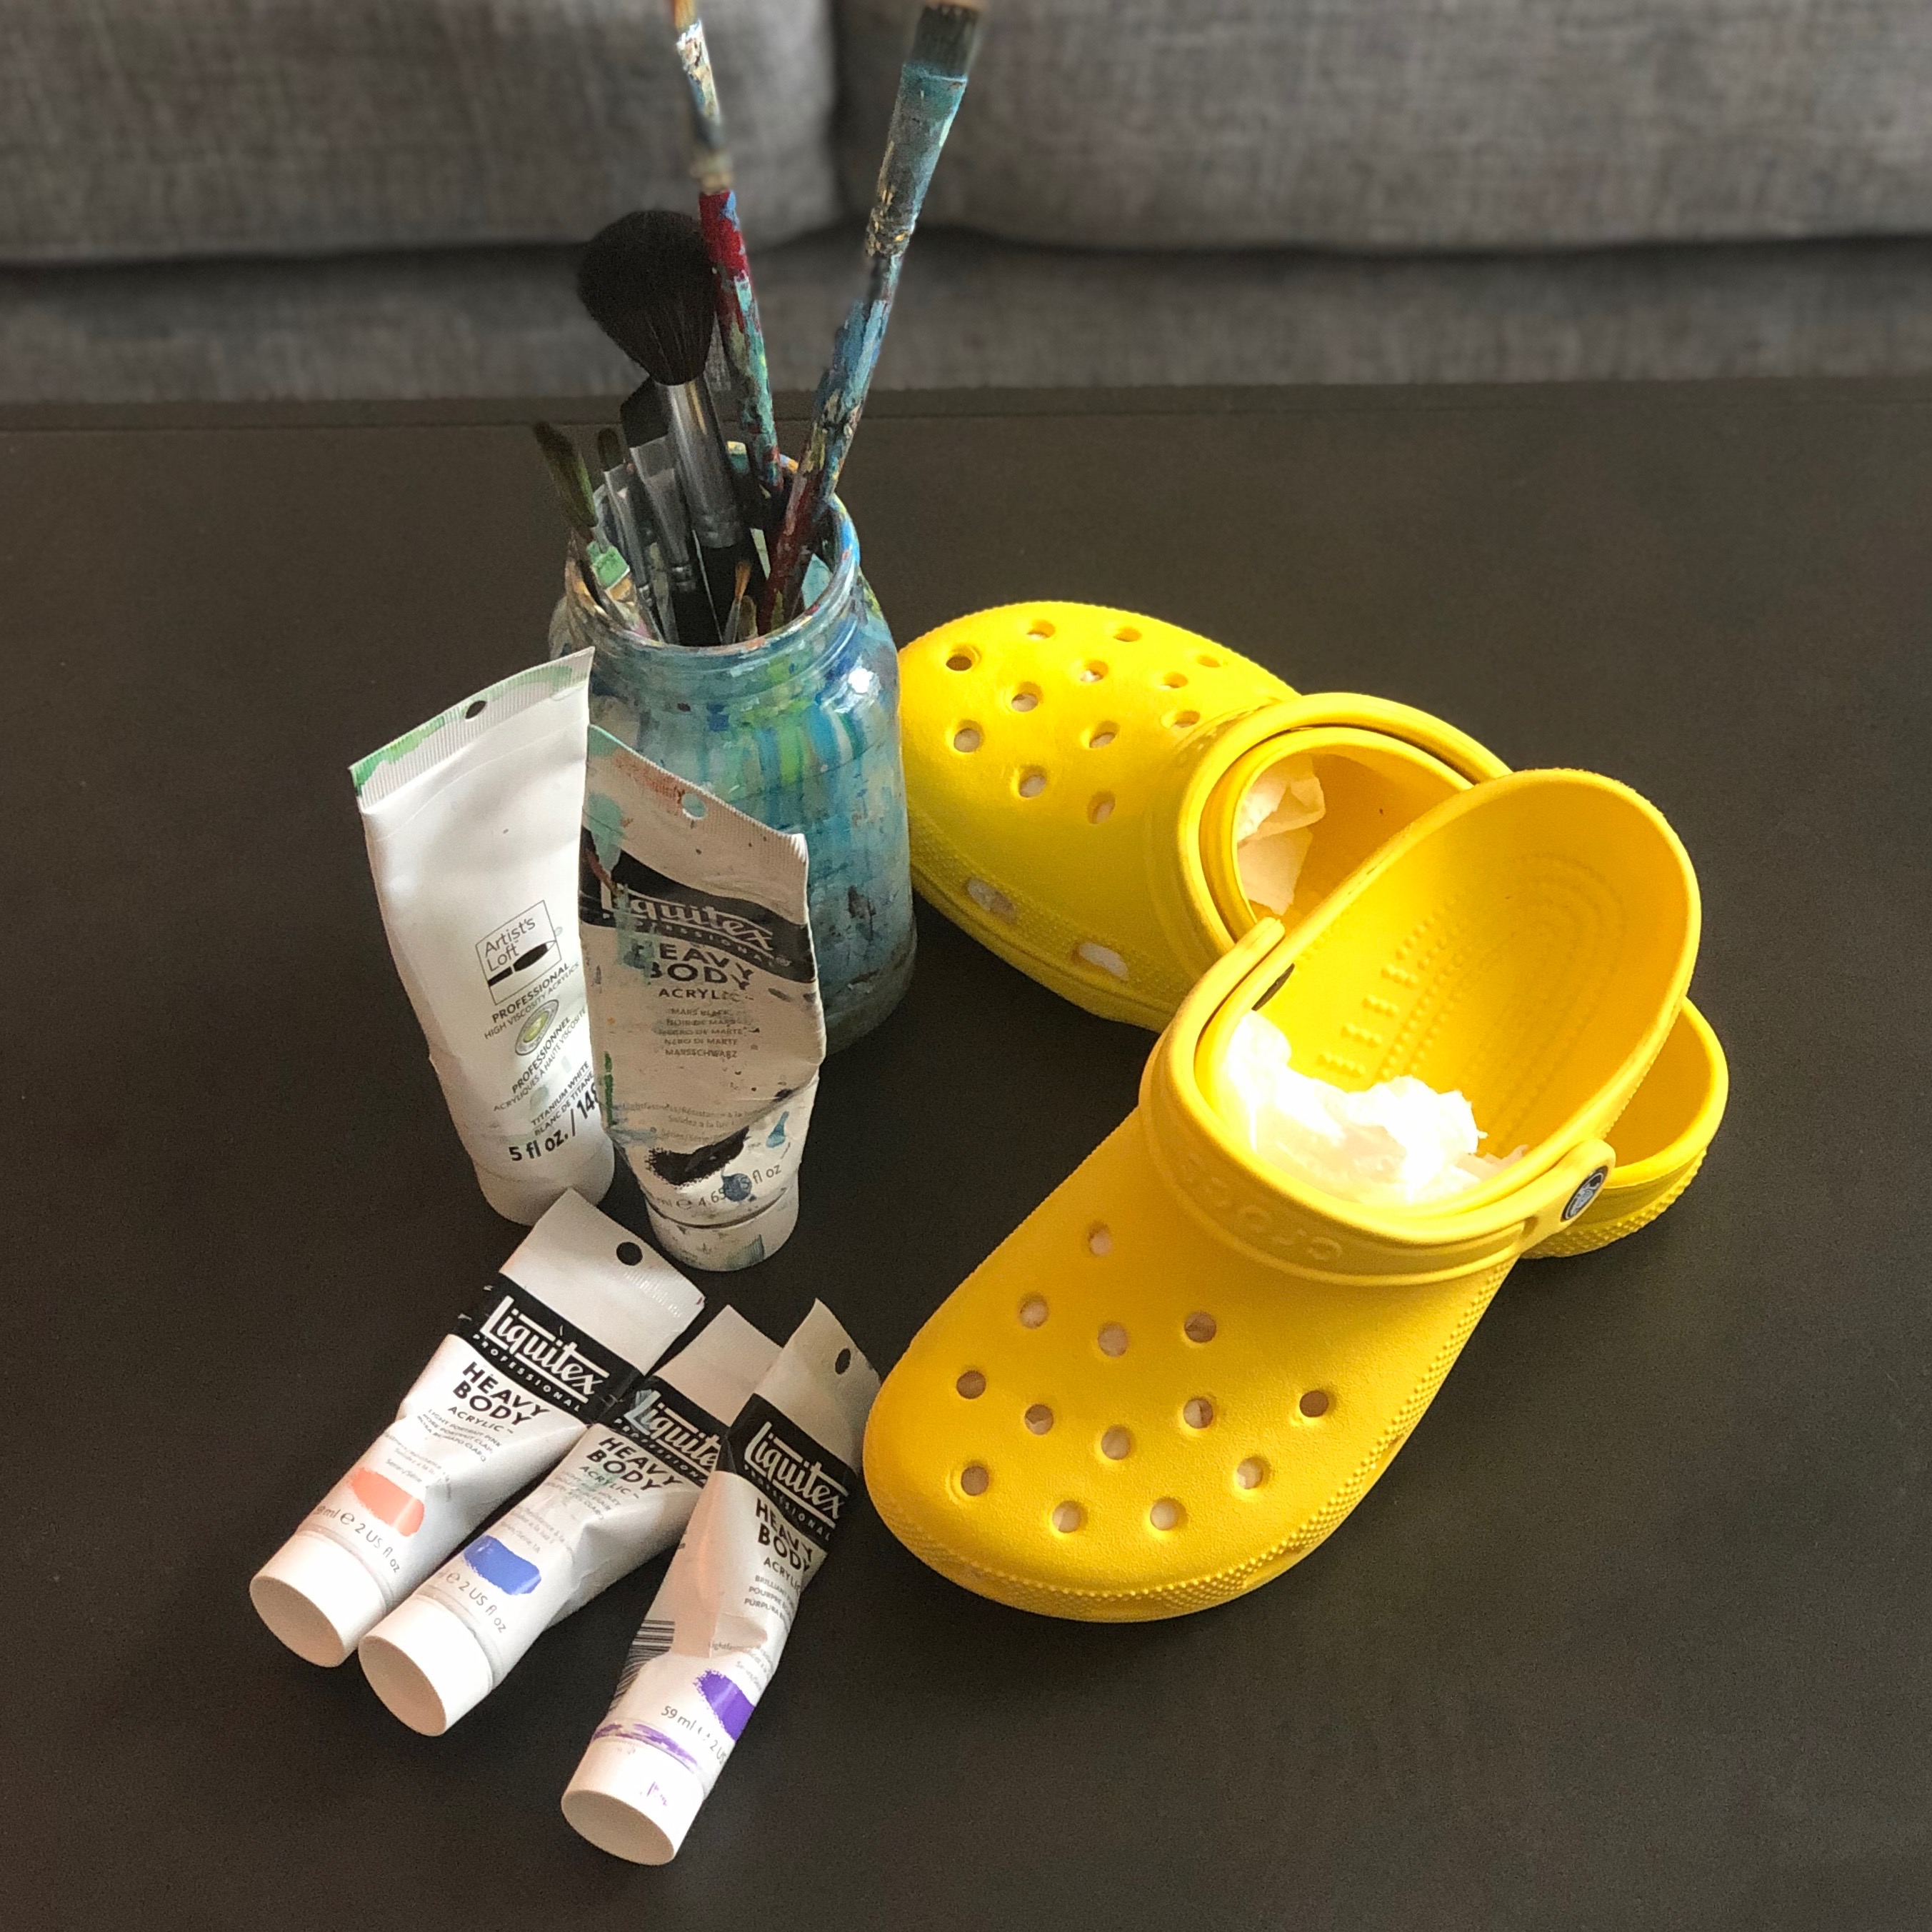 Crocs Twitter: "When imitates art...customize those Crocs. We want to see you turn your shoes into a work of art! Tag us in your masterpieces. 🎨 https://t.co/NQwb65xWjB" /